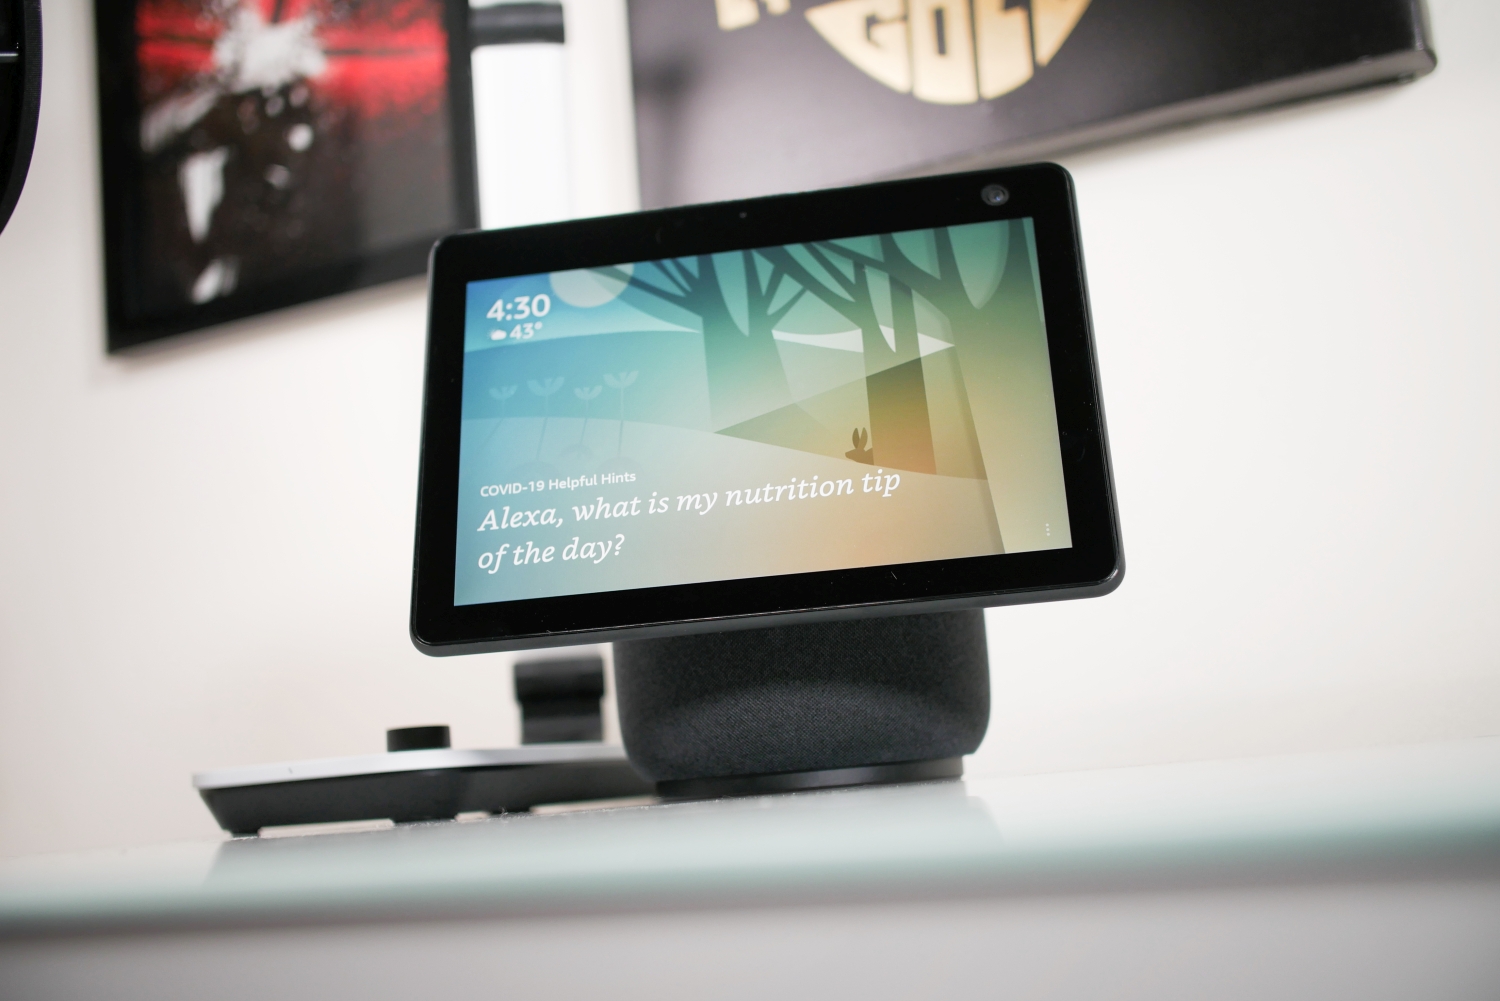 Built-In Screen Sets  Echo Show Apart From Smart-Home Hub Rivals